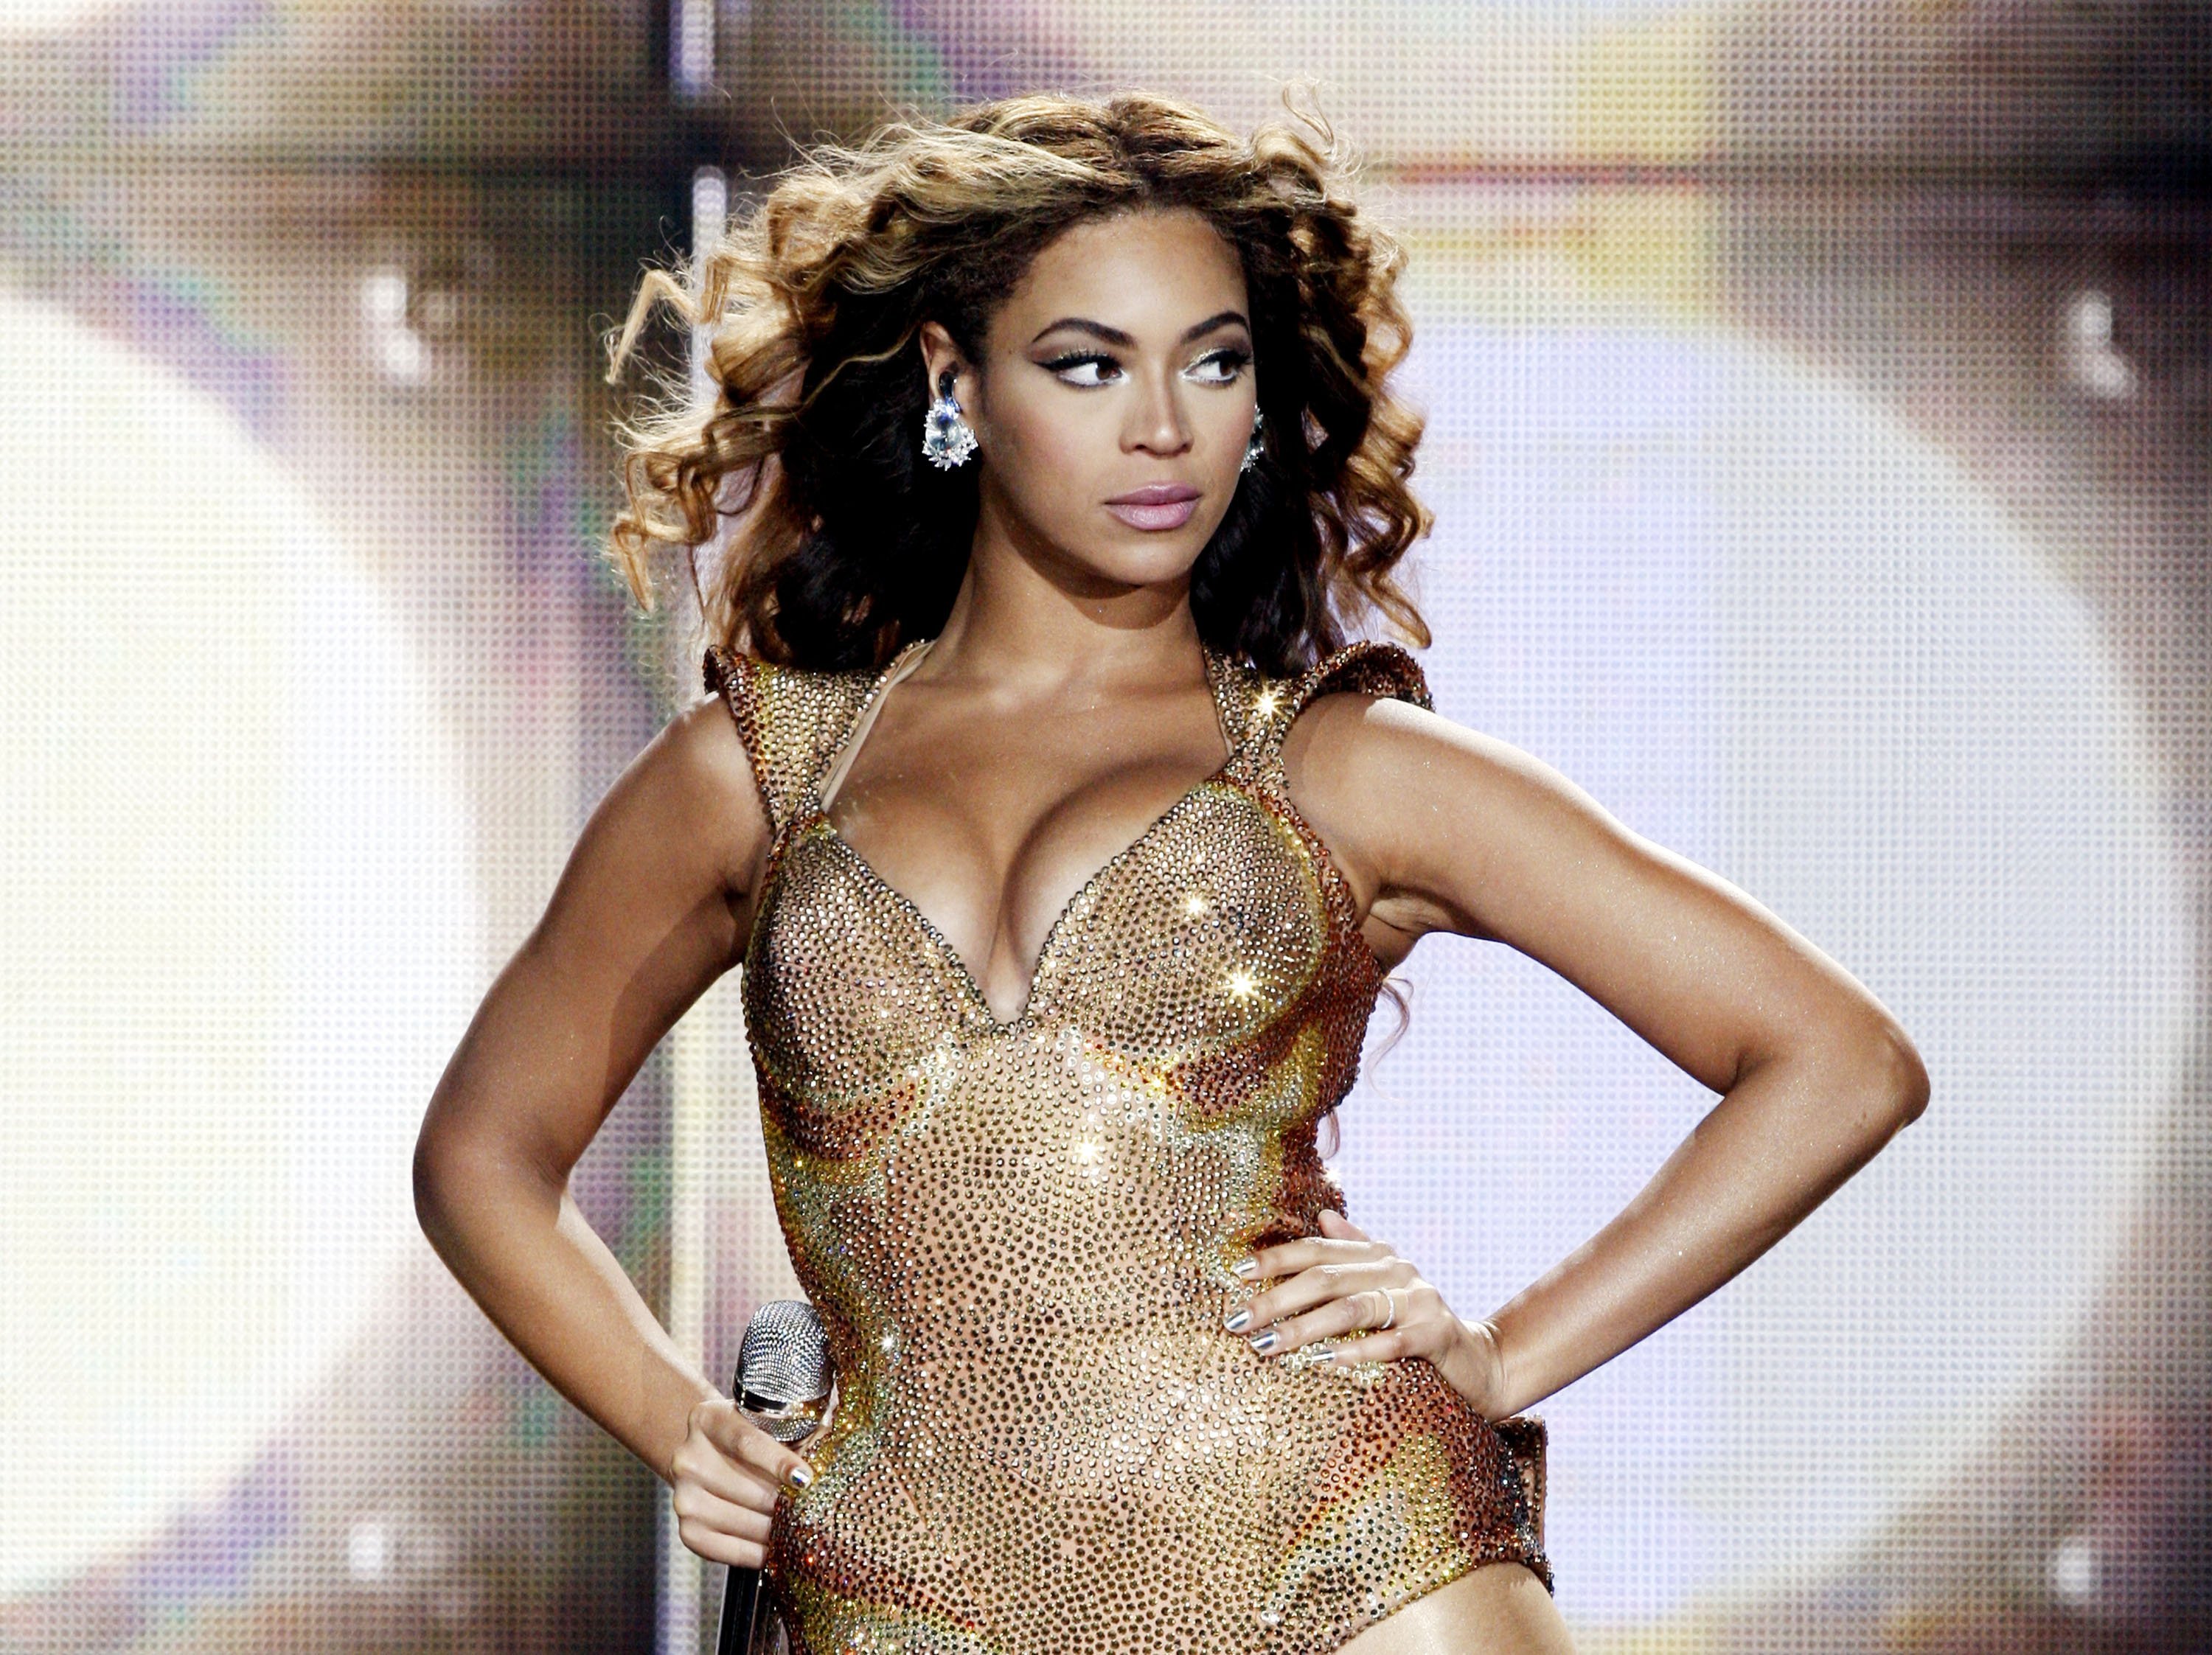 Beyonce performing at the Staples Center in Los Angeles in July 2009. | Photo: Getty Images